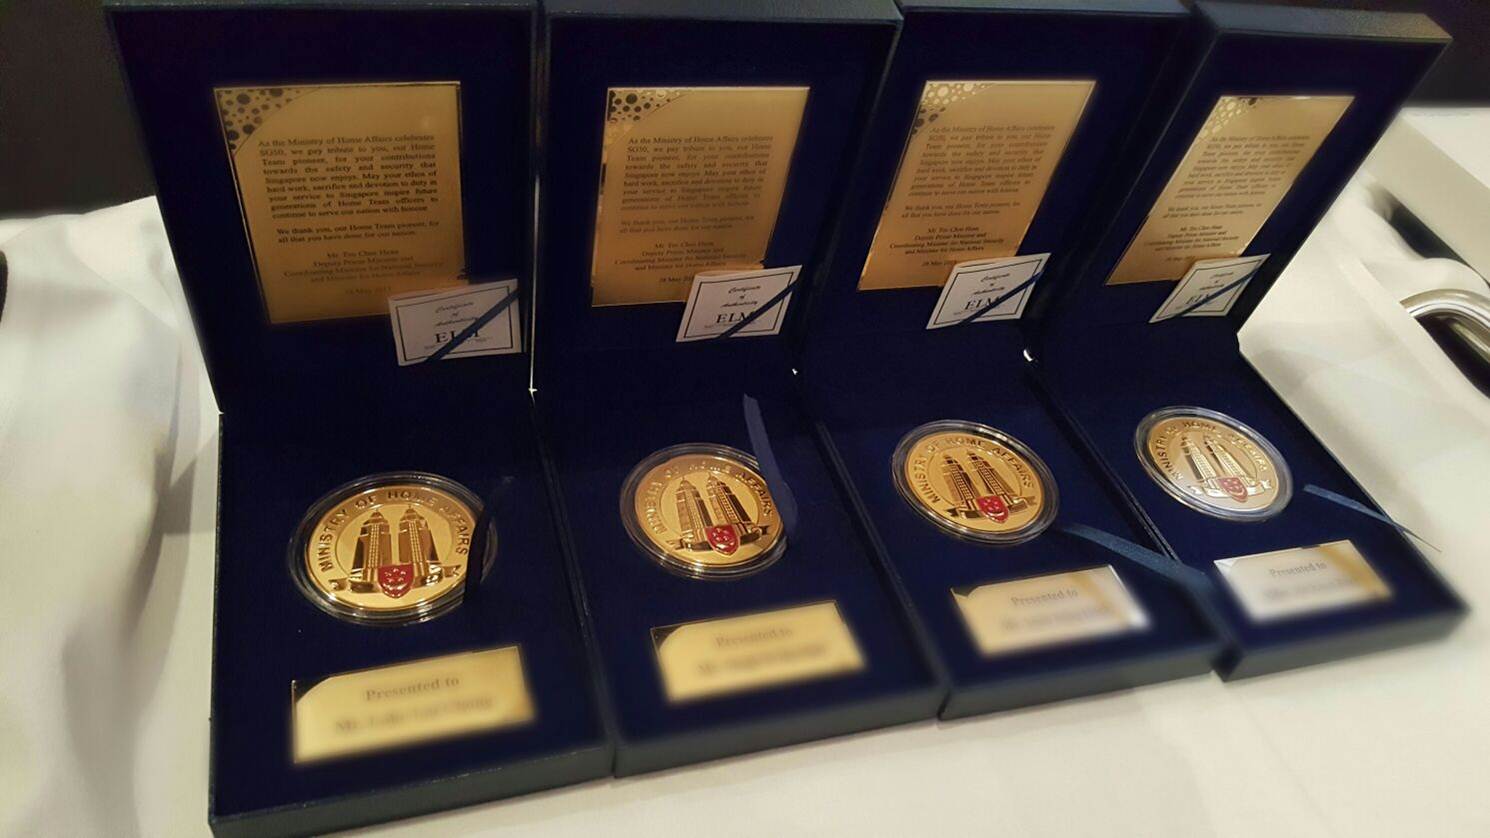 Photo 2: SG50 Medallions given out to CNB pioneers during the CNB Appreciation Dinner 2015